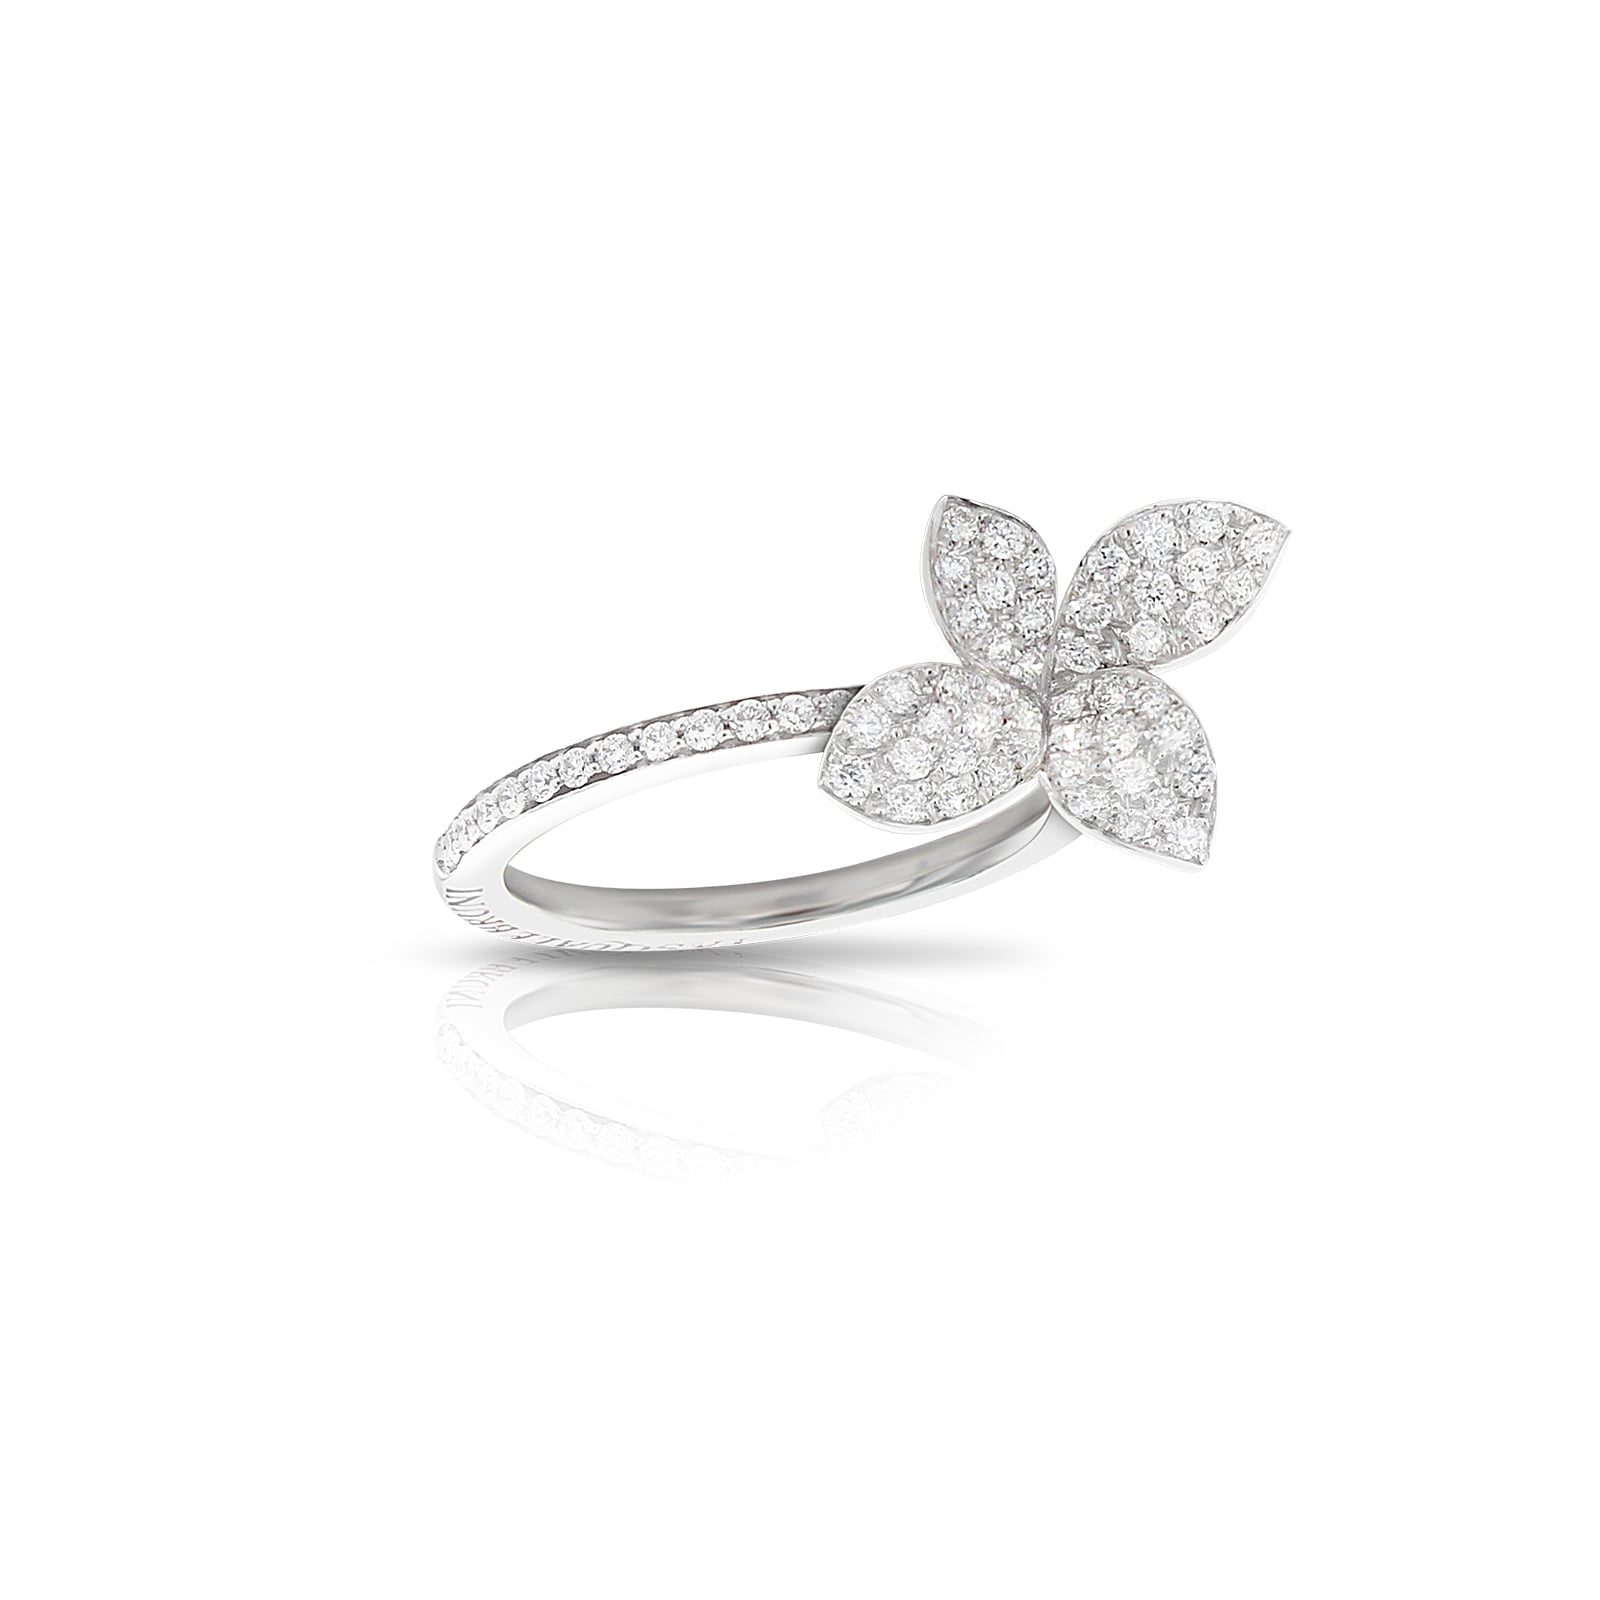 Petit Garden Small Flower Ring in 18ct White Gold with Diamonds - Ring Size M